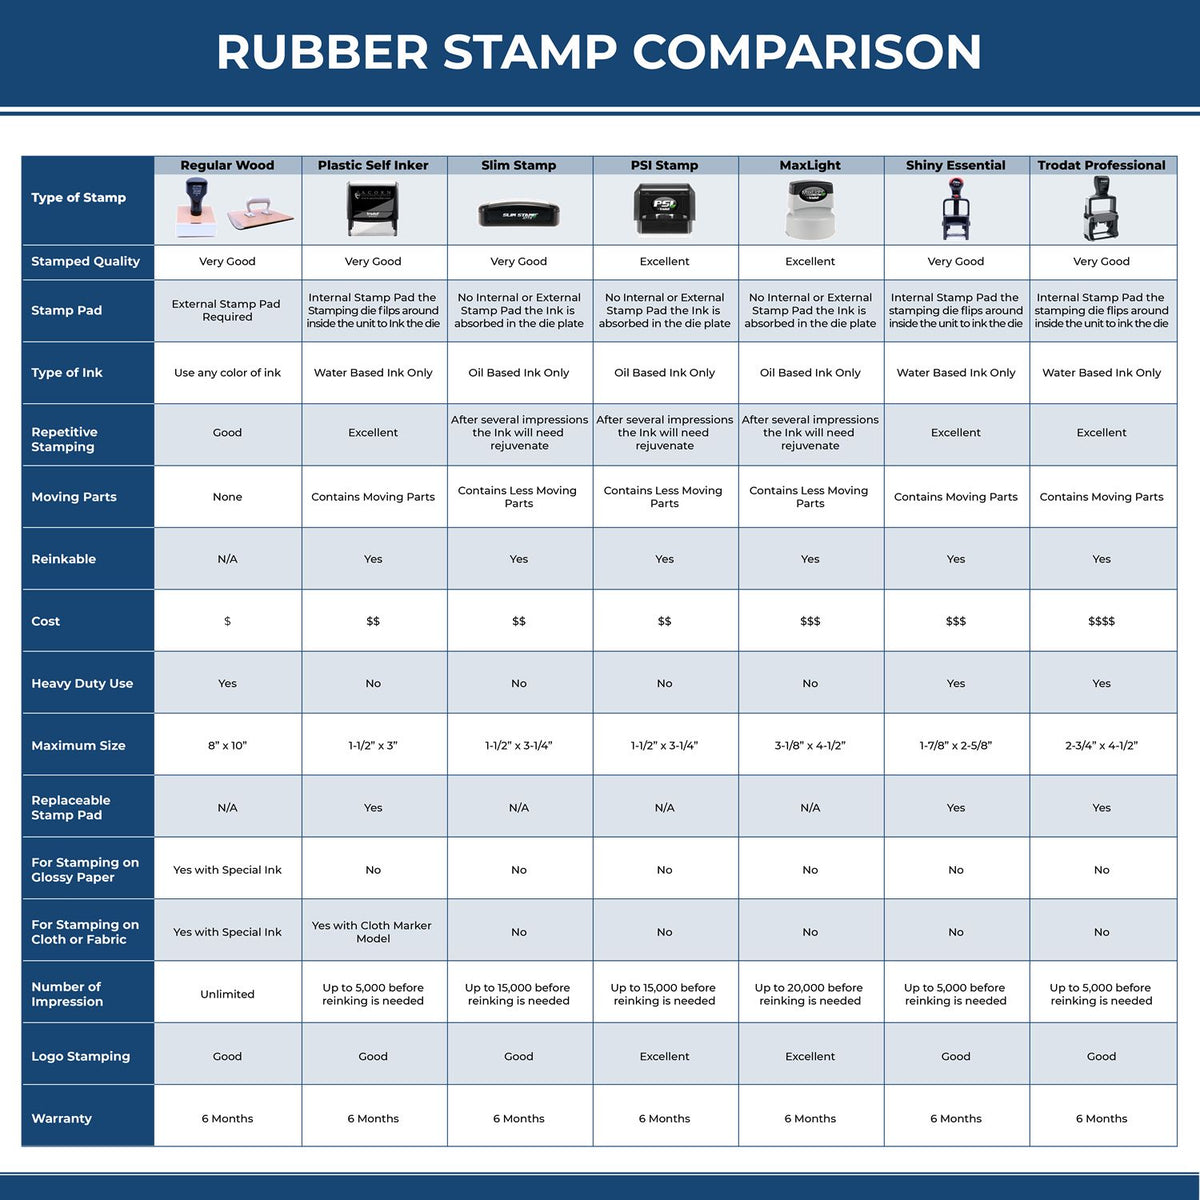 Large Self Inking Application Incomplete Stamp 4555S Rubber Stamp Comparison